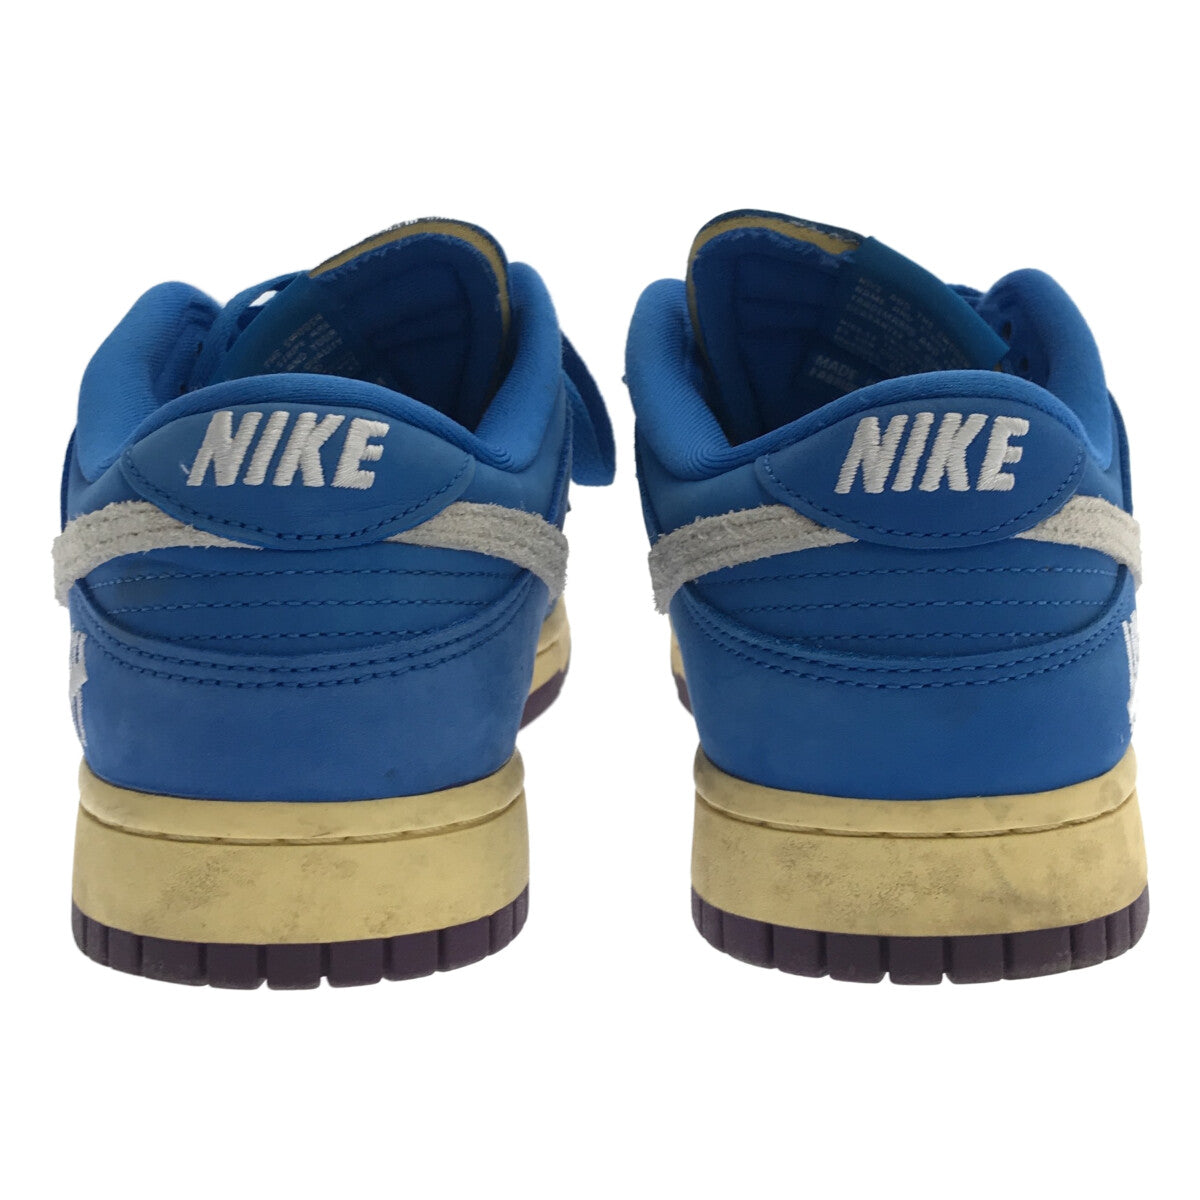 NIKE / ナイキ | × UNDEFEATED DUNK LOW SP ダンク ロー スニーカー | 27 |